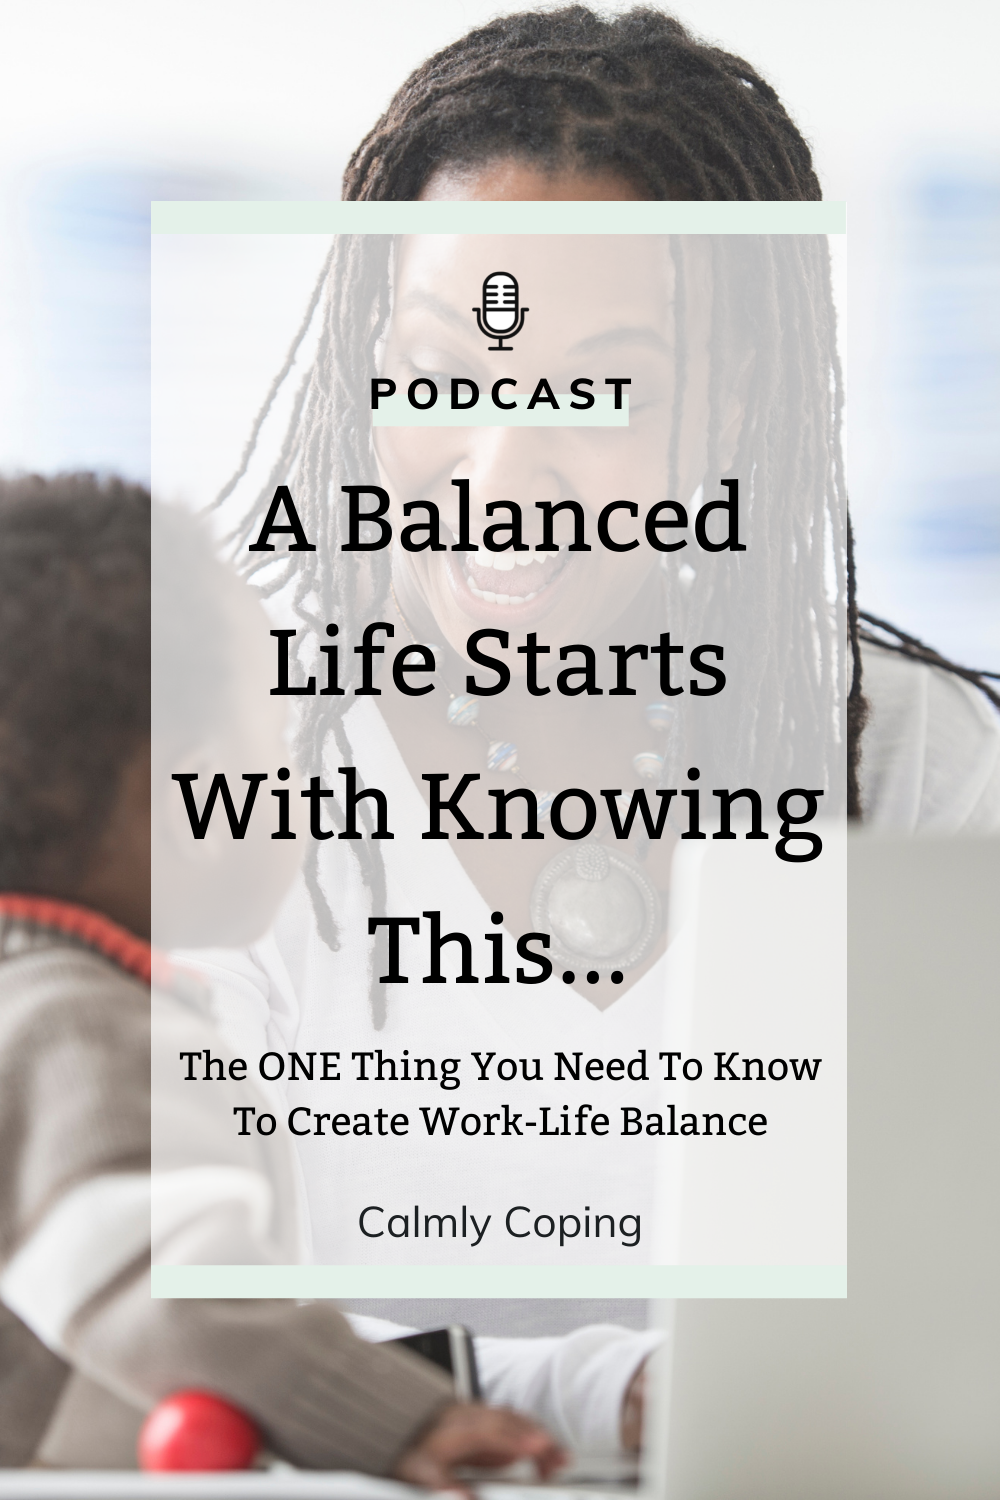 A Balanced Life Starts With Knowing This...